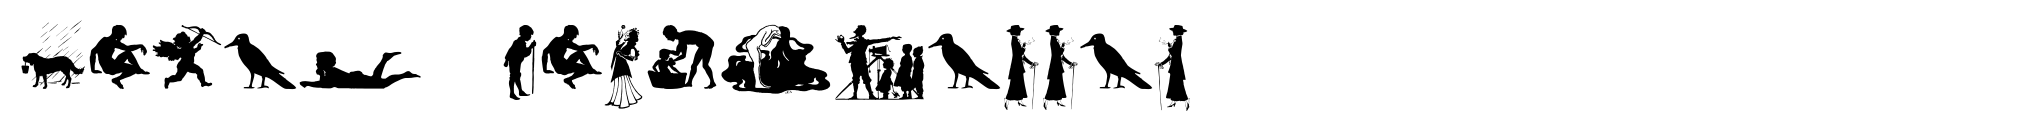 Mixed Silhouettes image